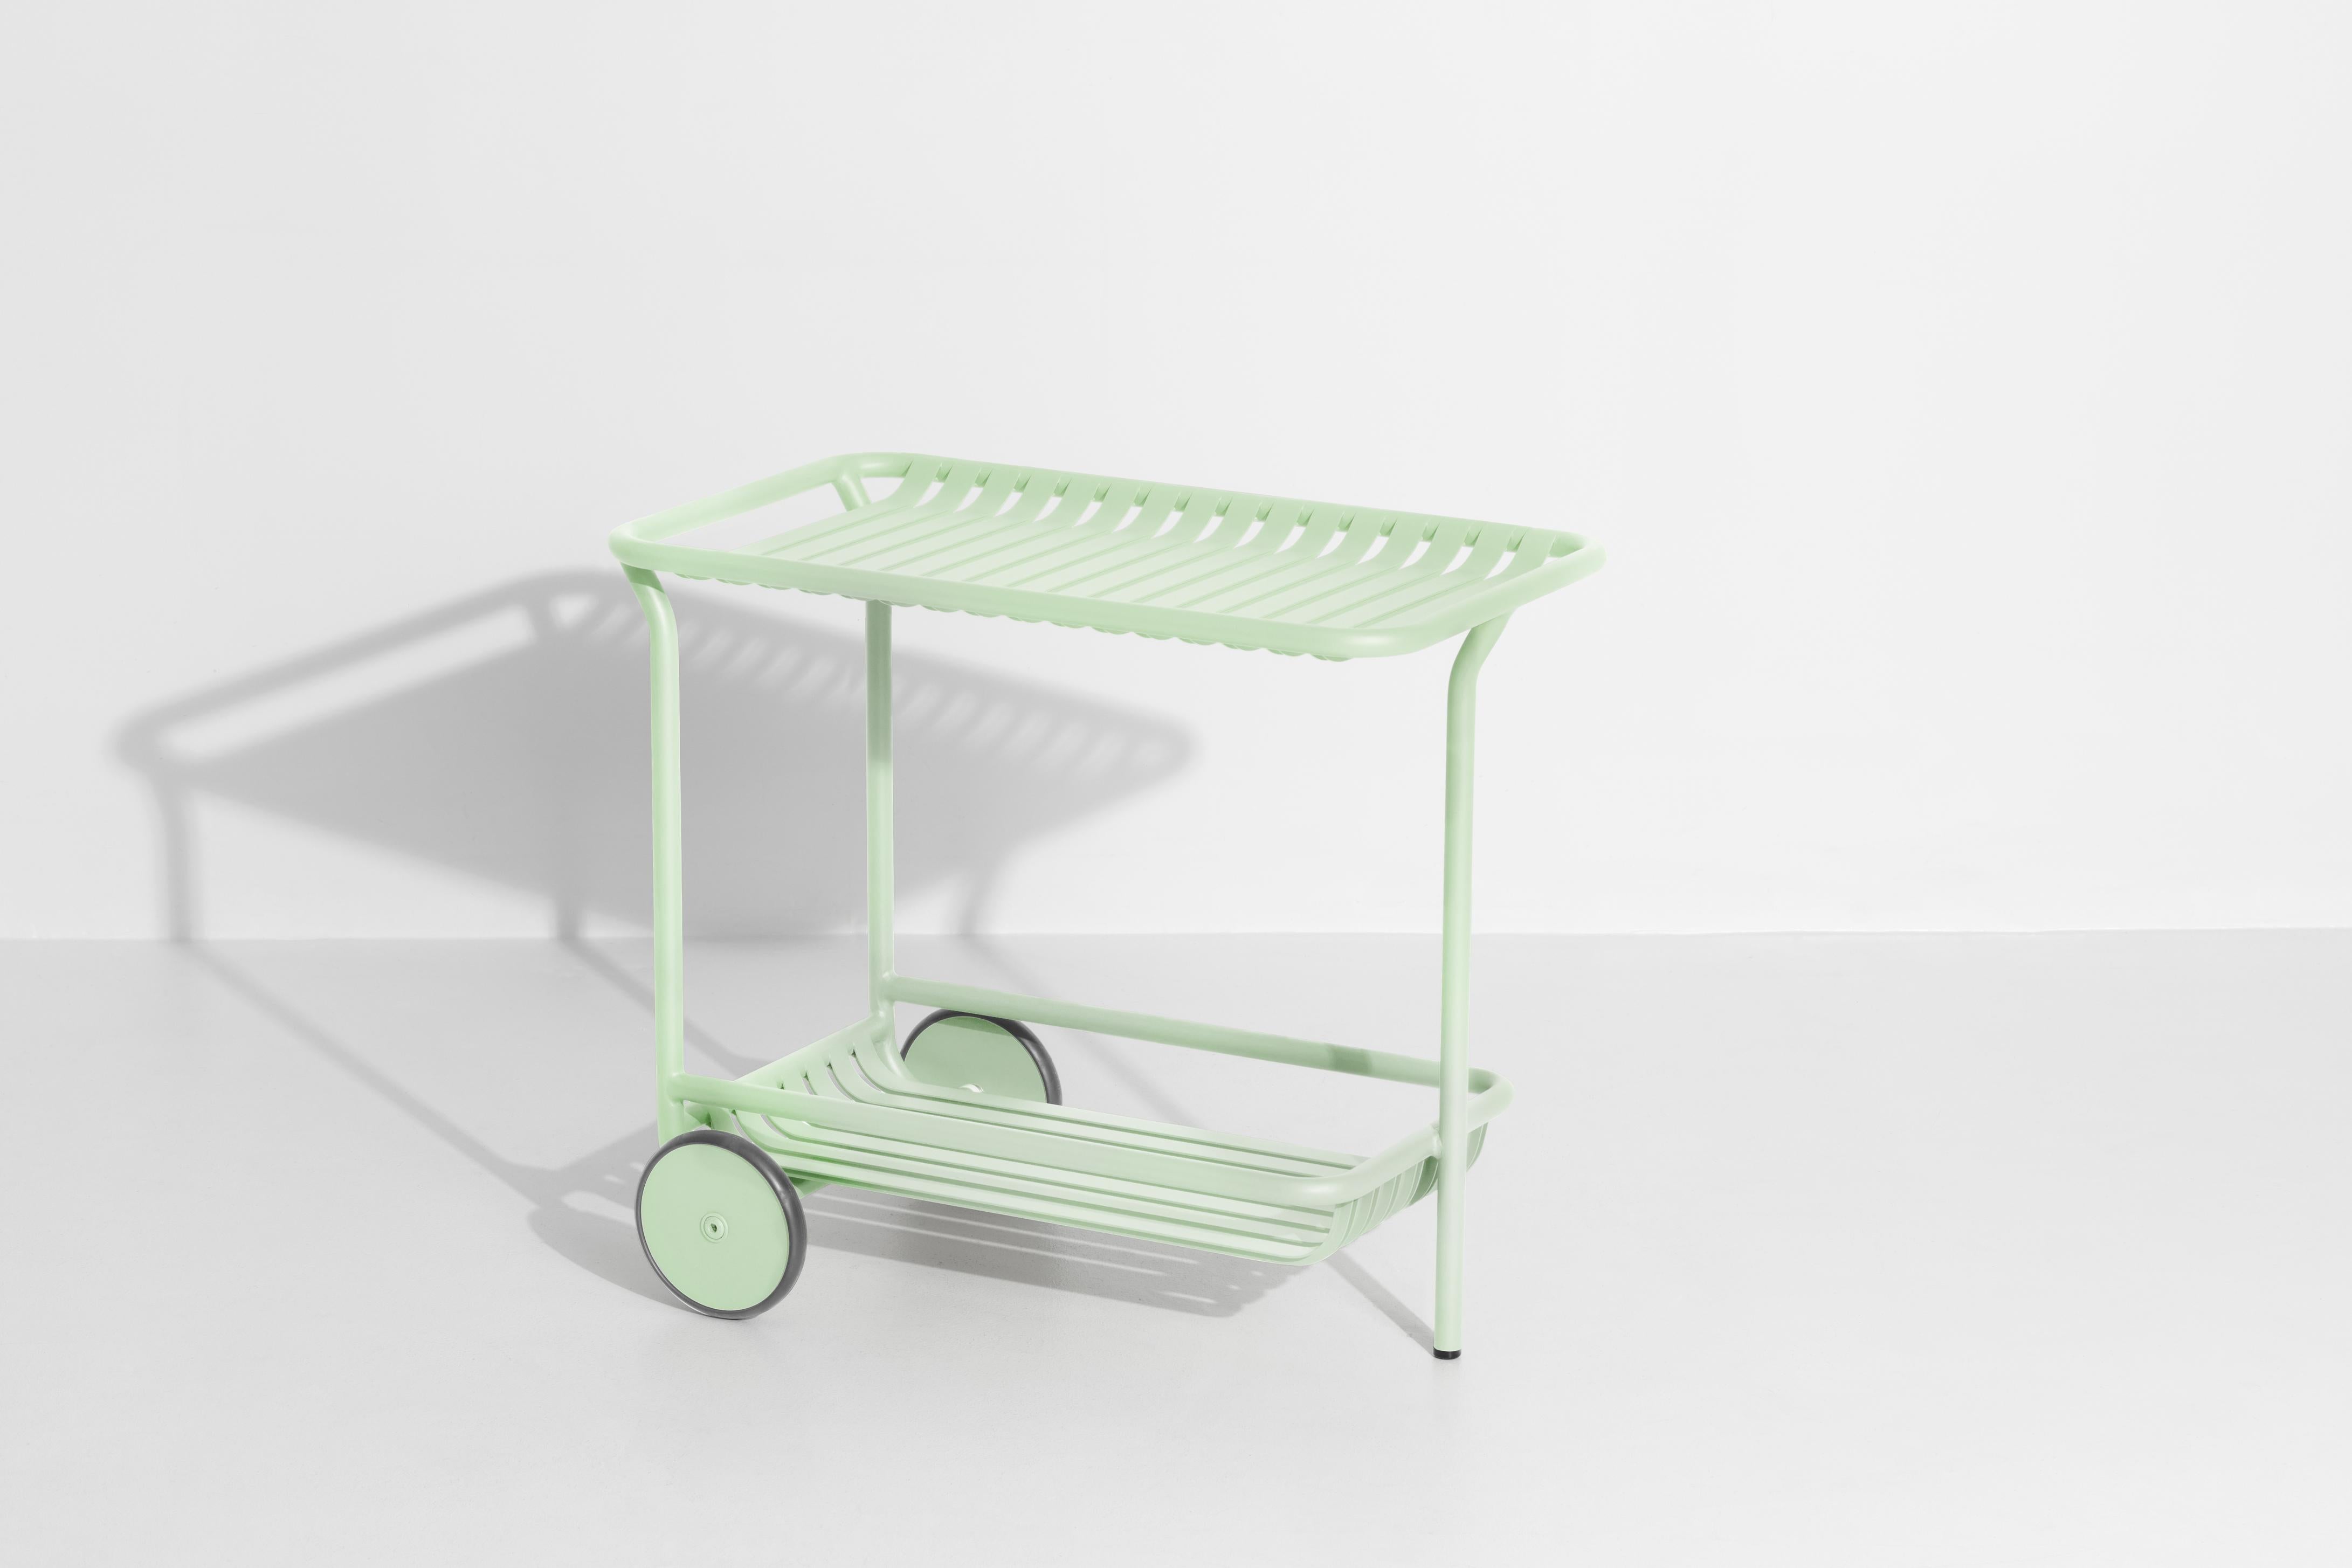 Petite Friture Week-End Trolley in Pastel Green Aluminium by Studio BrichetZiegler, 2017

The week-end collection is a full range of outdoor furniture, in aluminium grained epoxy paint, matt finish, that includes 18 functions and 8 colours for the